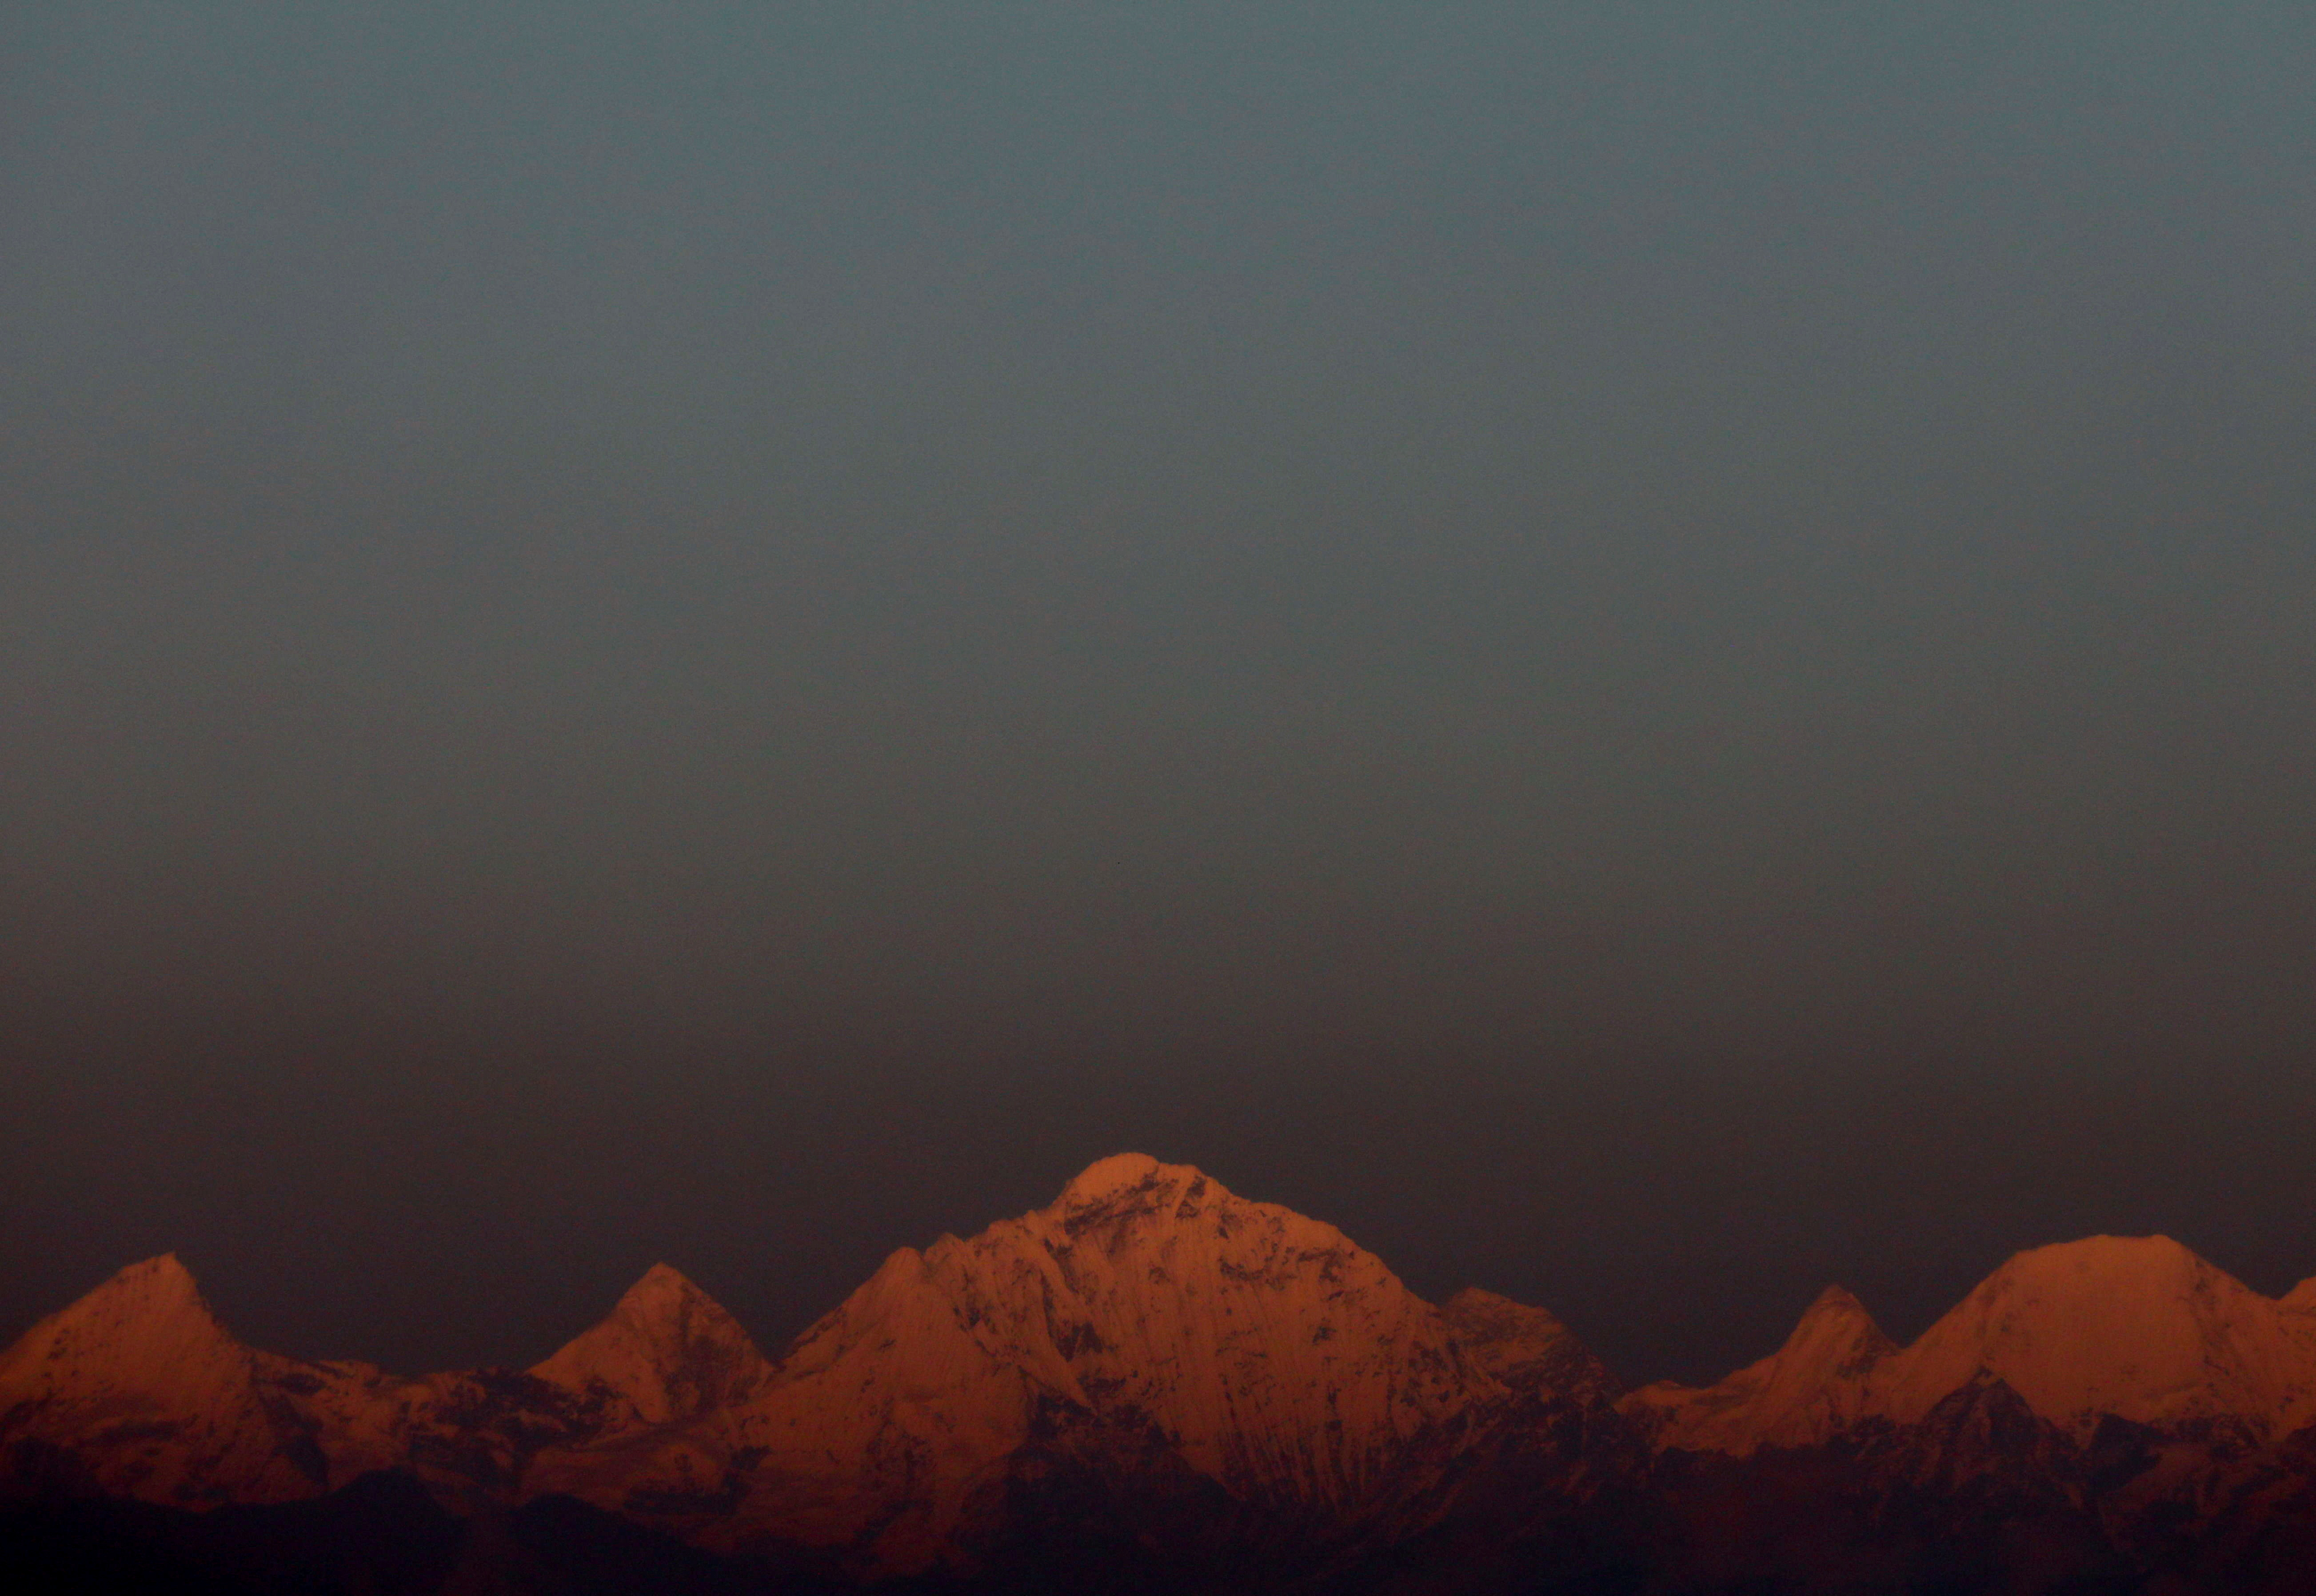 Mount Everest, the world's highest mountain, and other peaks of the Himalayan range are seen during sunset from Kathmandu